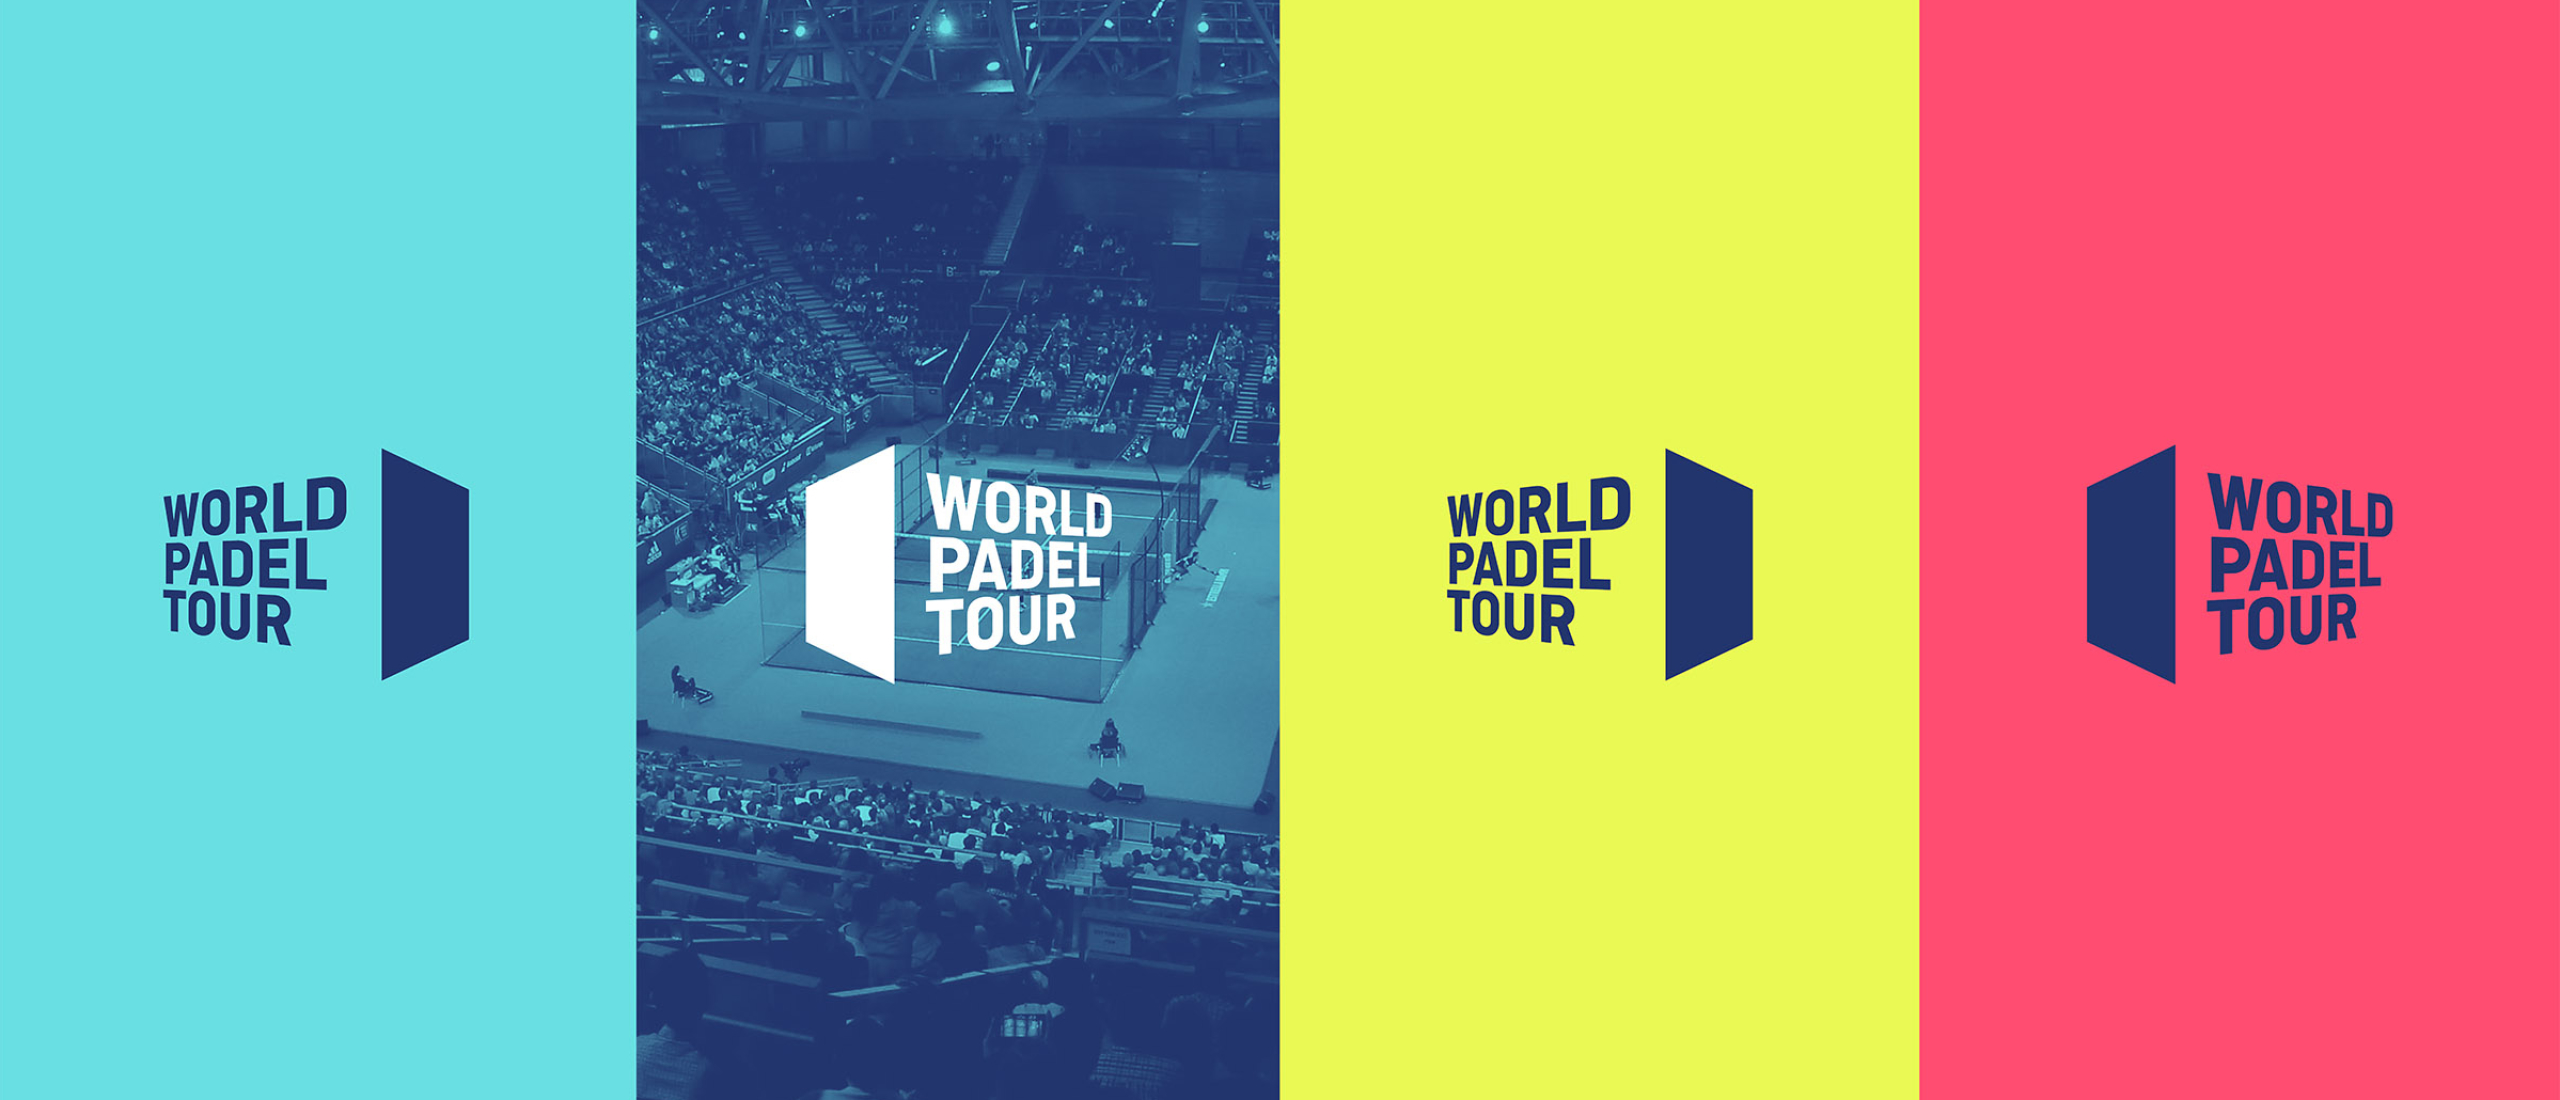 The NEW padel partners in 2021 WPT